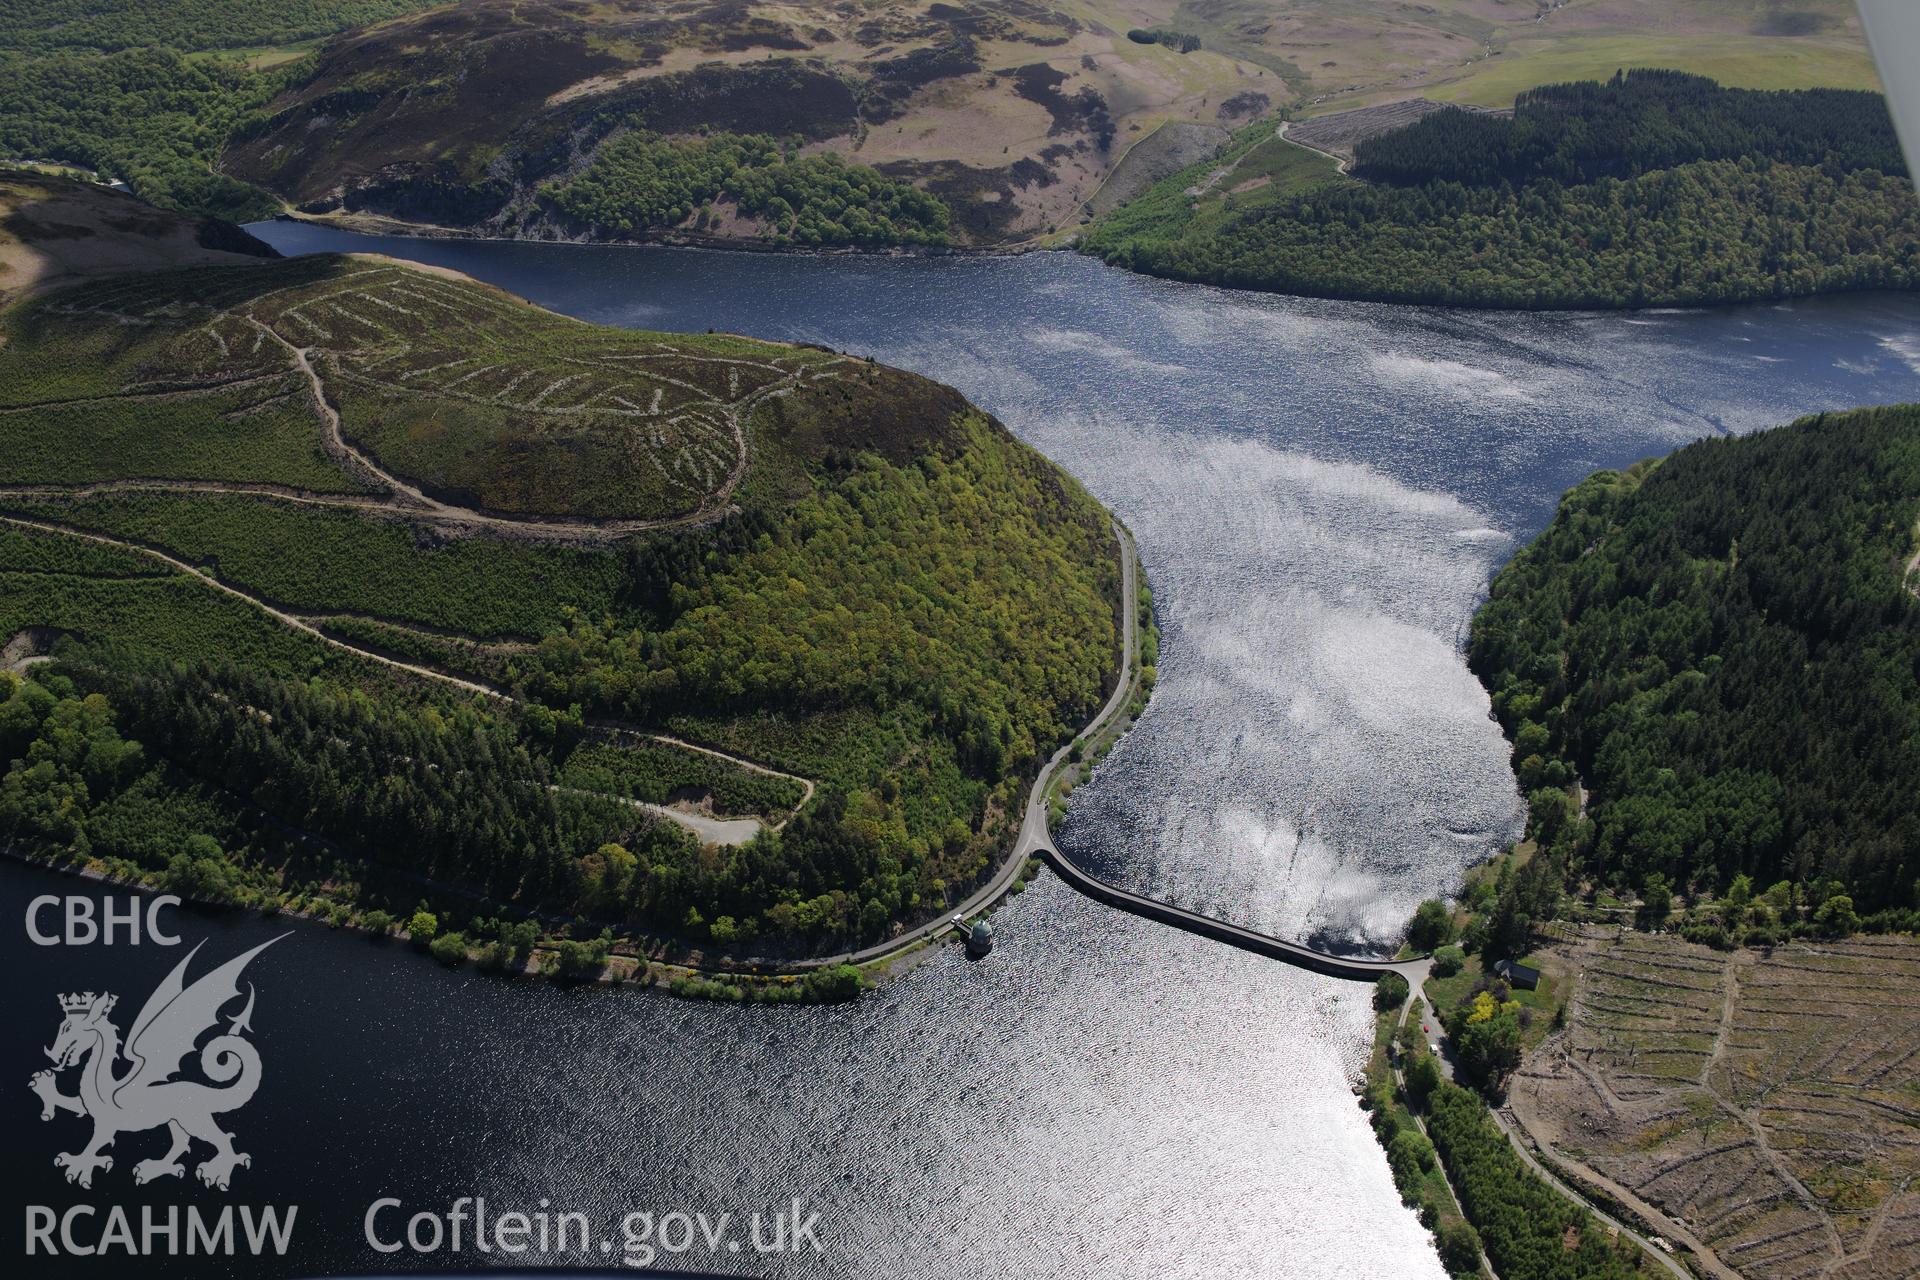 Nantgwyllt church and Garreg-Ddu dam, valve tower and reservoir at the Elan Valley water scheme. Oblique aerial photograph taken during the Royal Commission's programme of archaeological aerial reconnaissance by Toby Driver on 3rd June 2015.